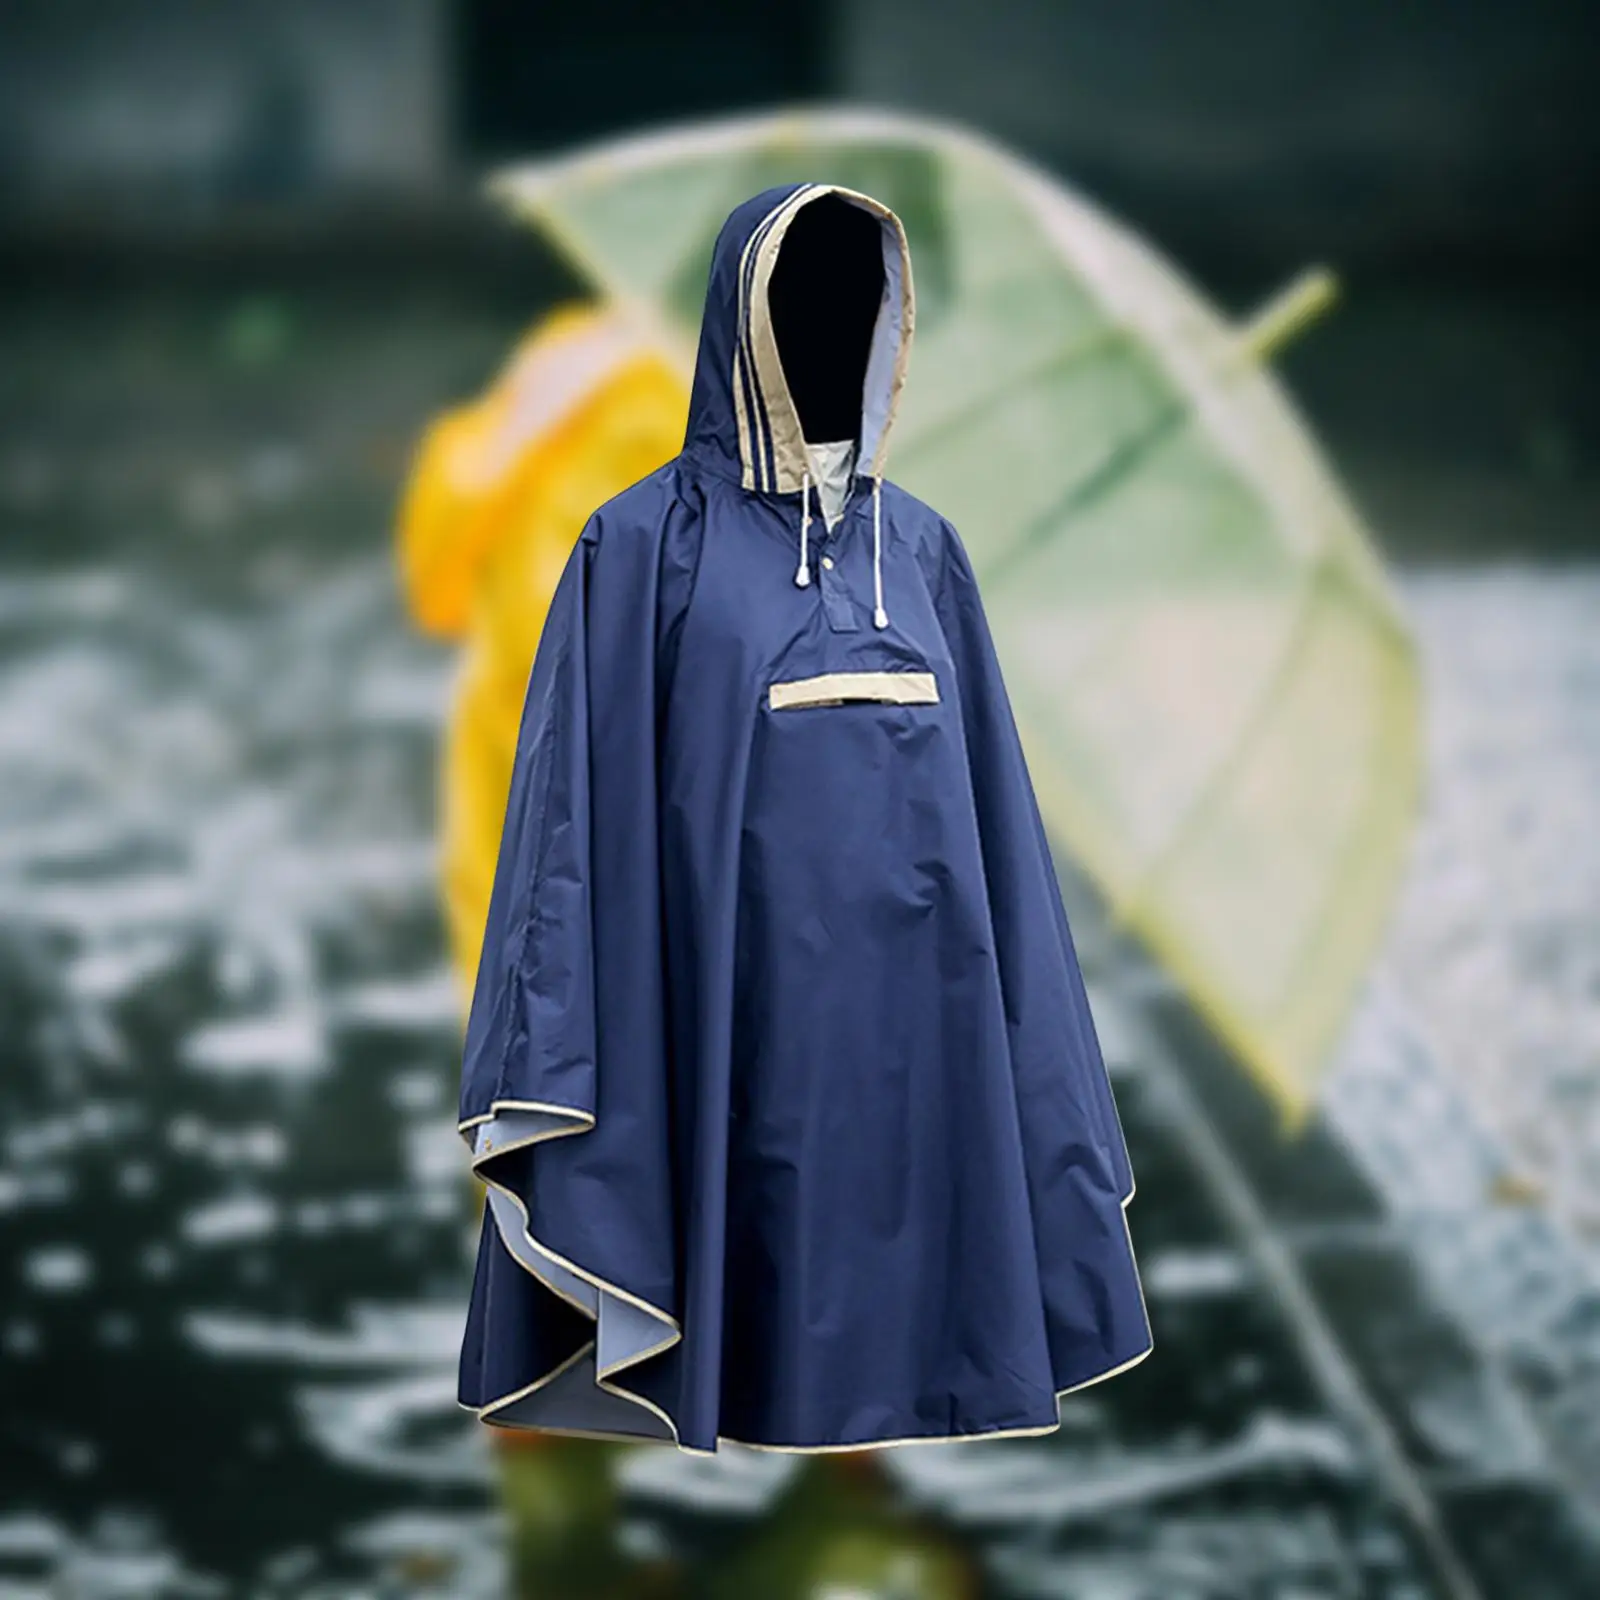 Kids Poncho Waterproof with Front Pocket Rain Jacket Outwear Rain Wear Hooded Poncho for Girls Boys Children Camping Hiking